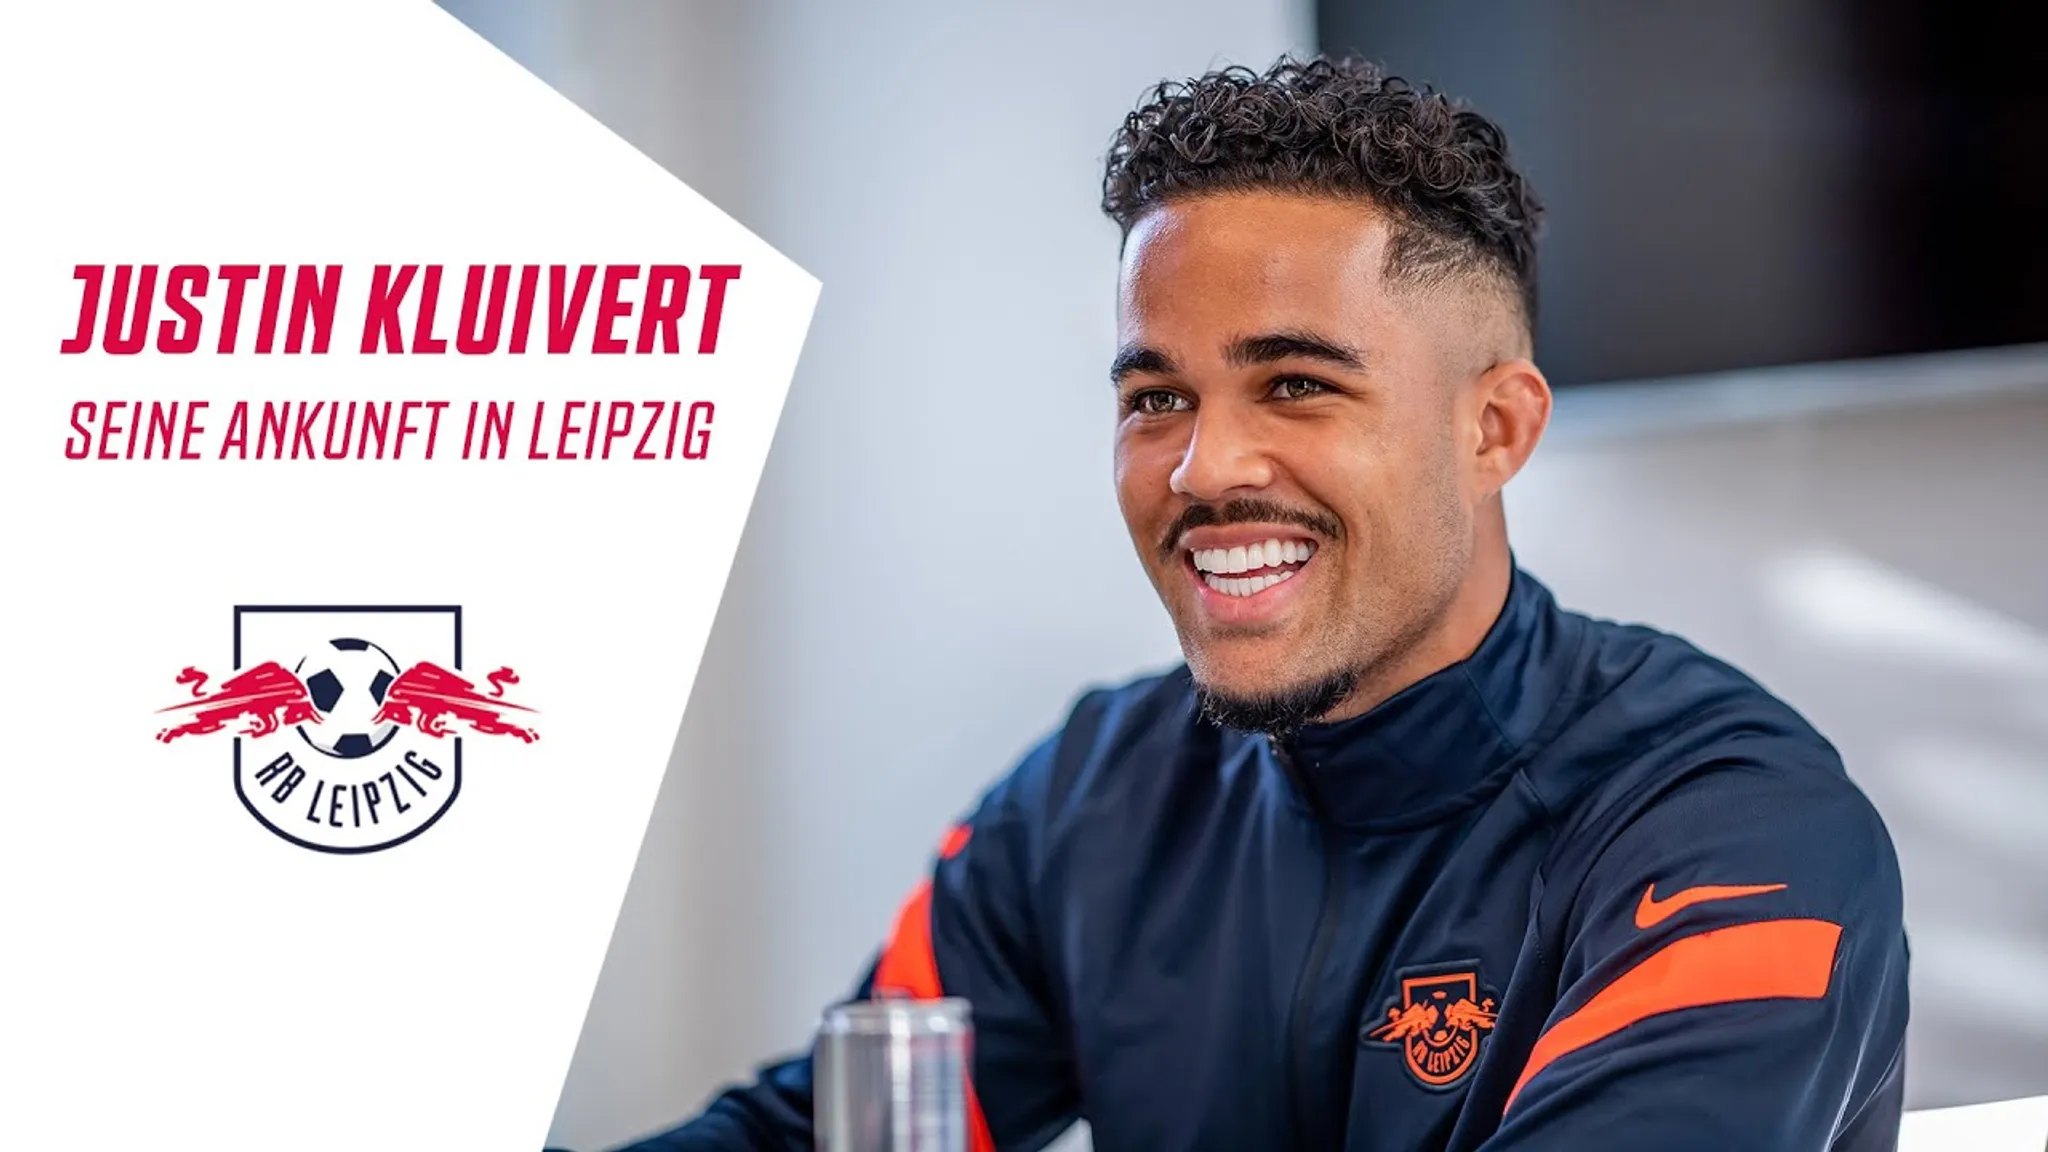 Justin Kluivert Ankunft bei RBL